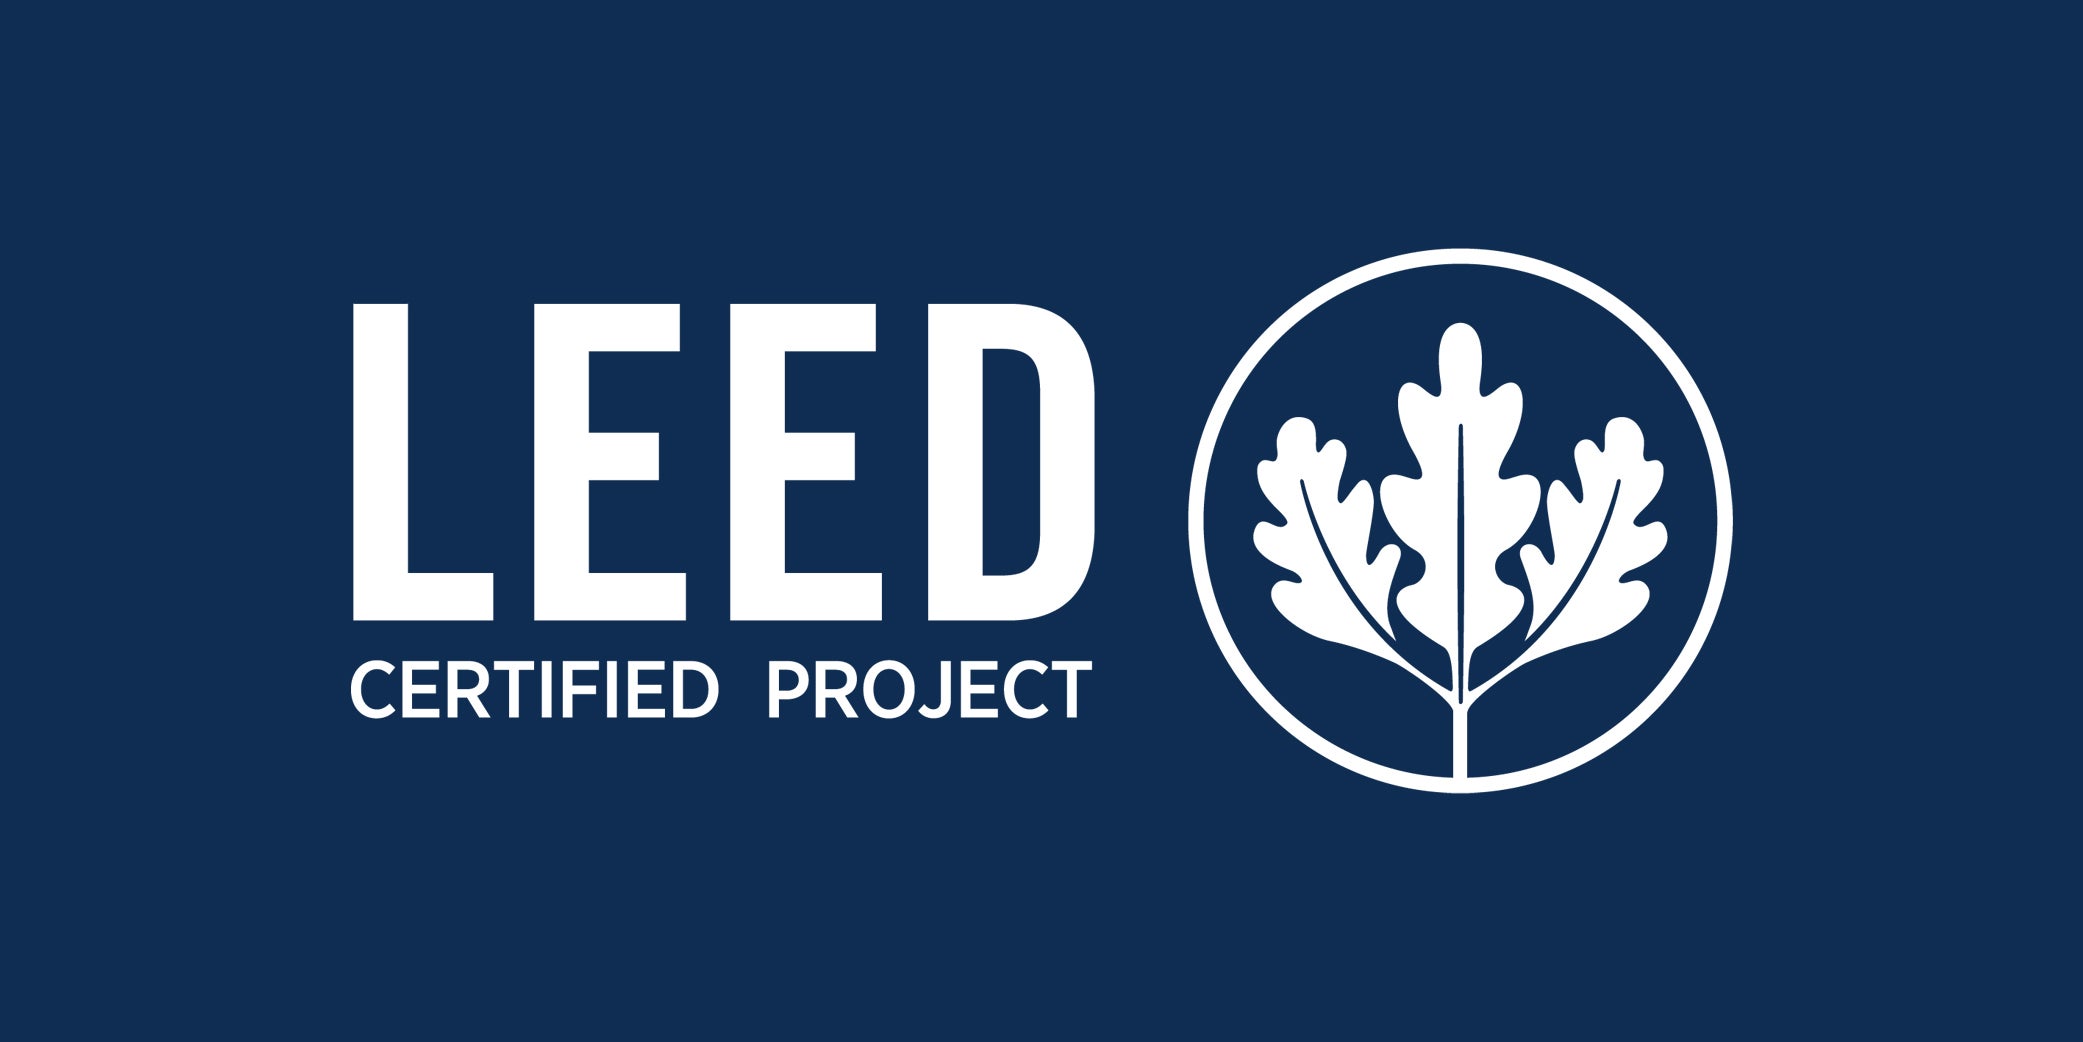 Northfield is Officially LEED Gold Certified